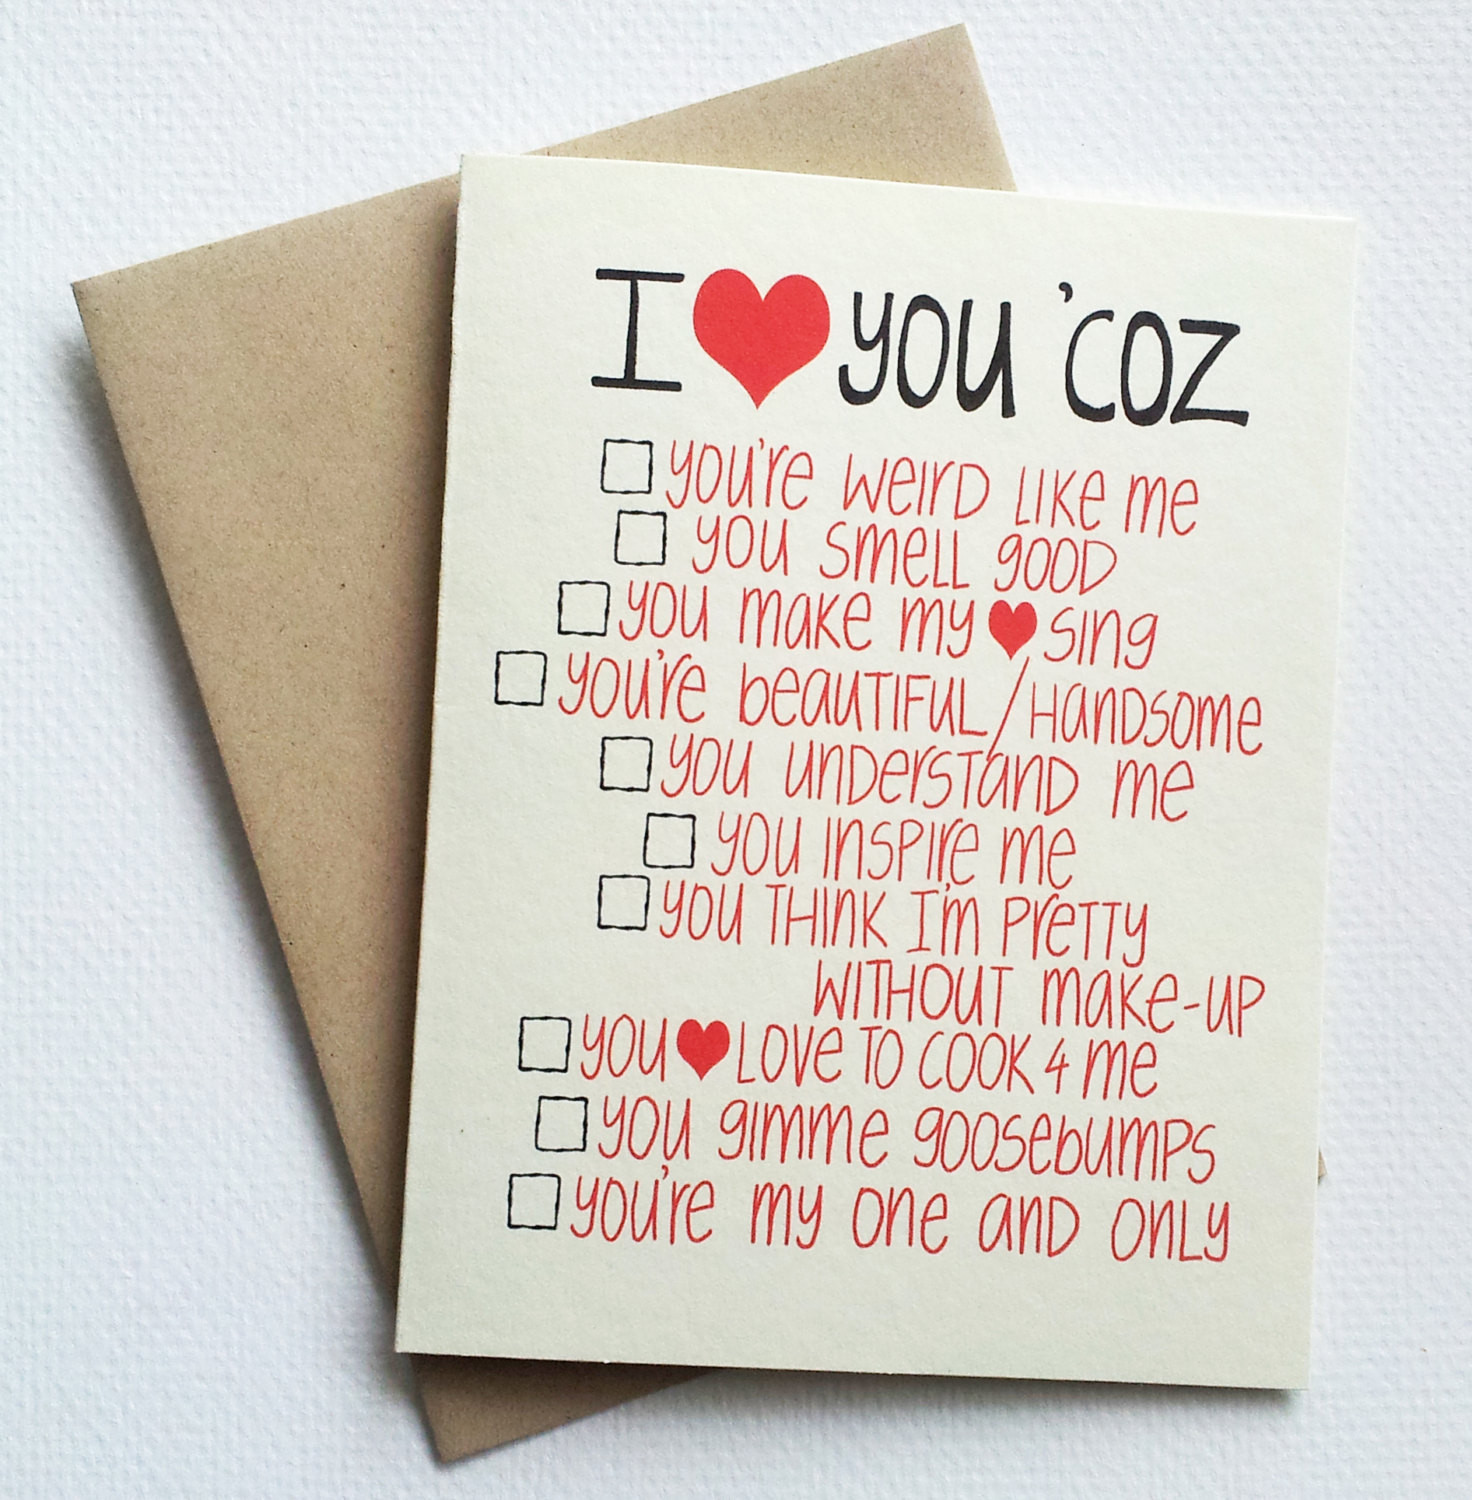 Valentines Day Cards Ideas for Him Awesome Funny Valentines Day Quotes for Him Quotesgram